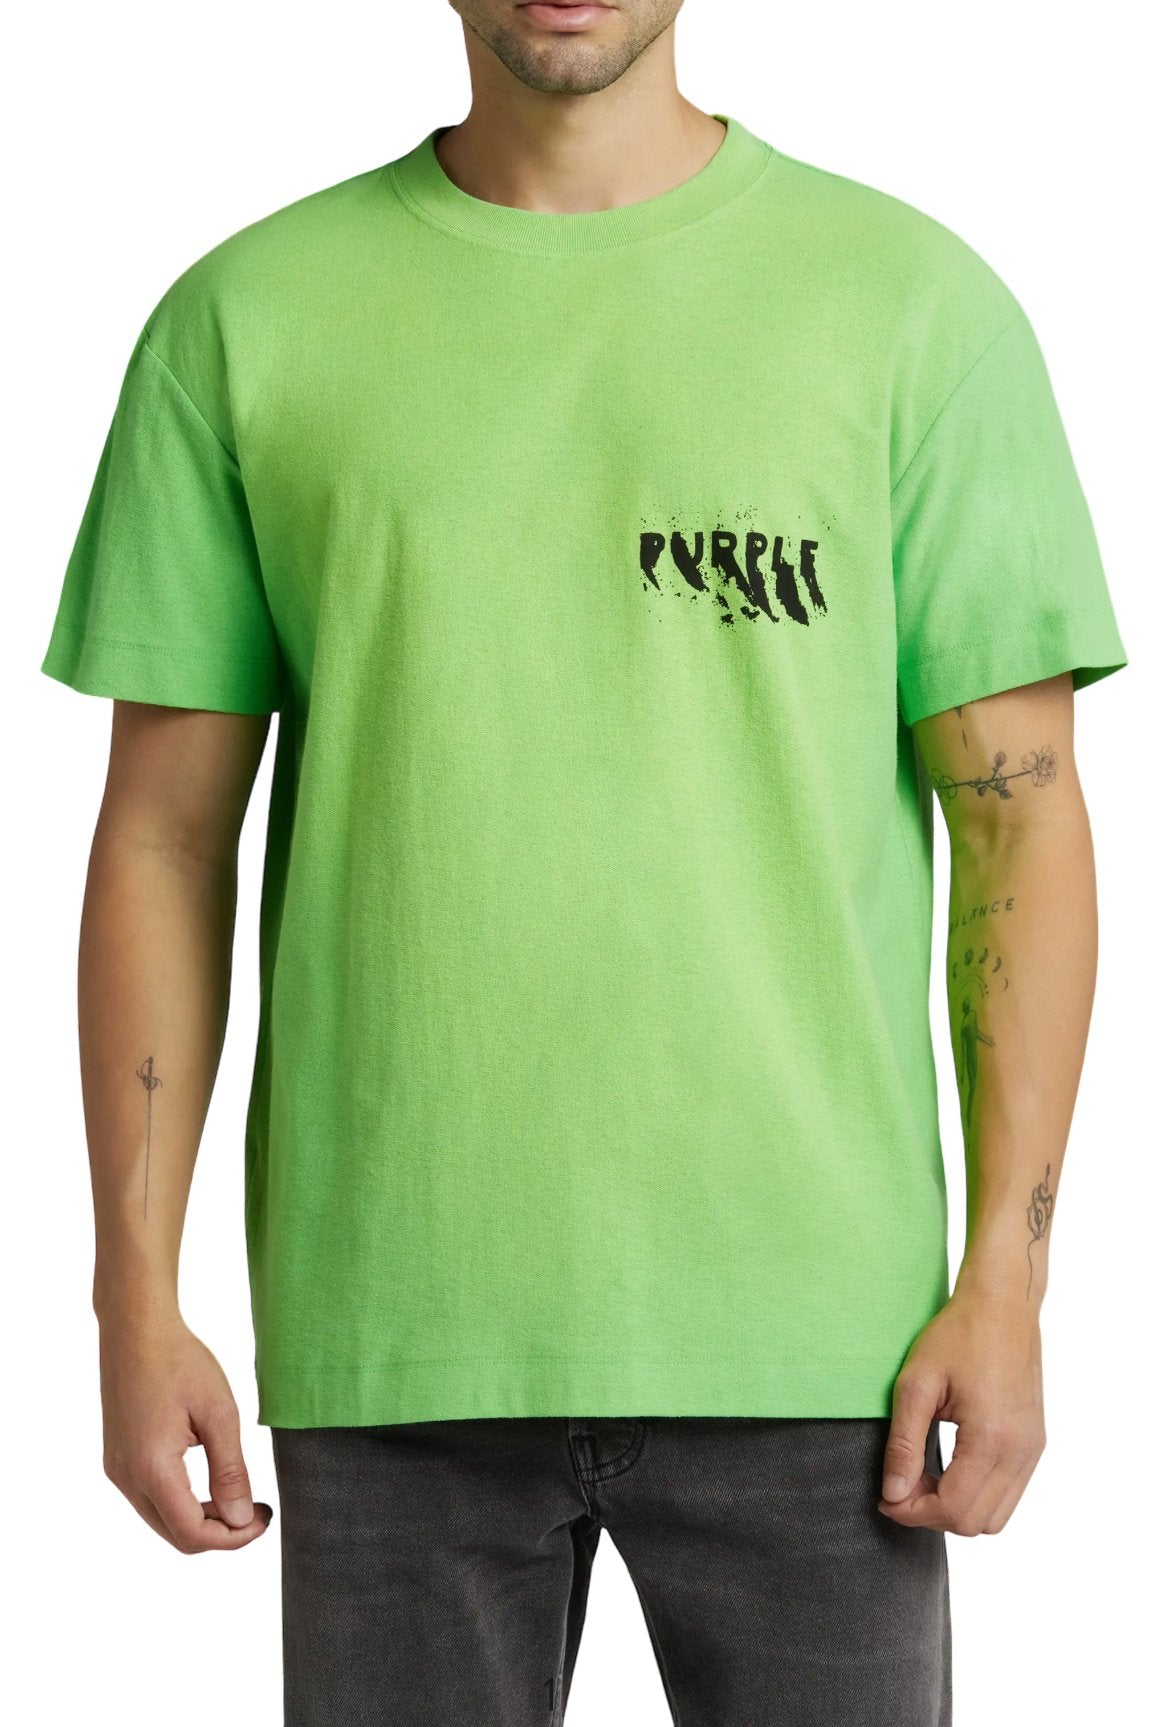 Man in a PURPLE BRAND P104-TJFL TEXTURED JERSEY SS TEE GREEN with black text on the chest.